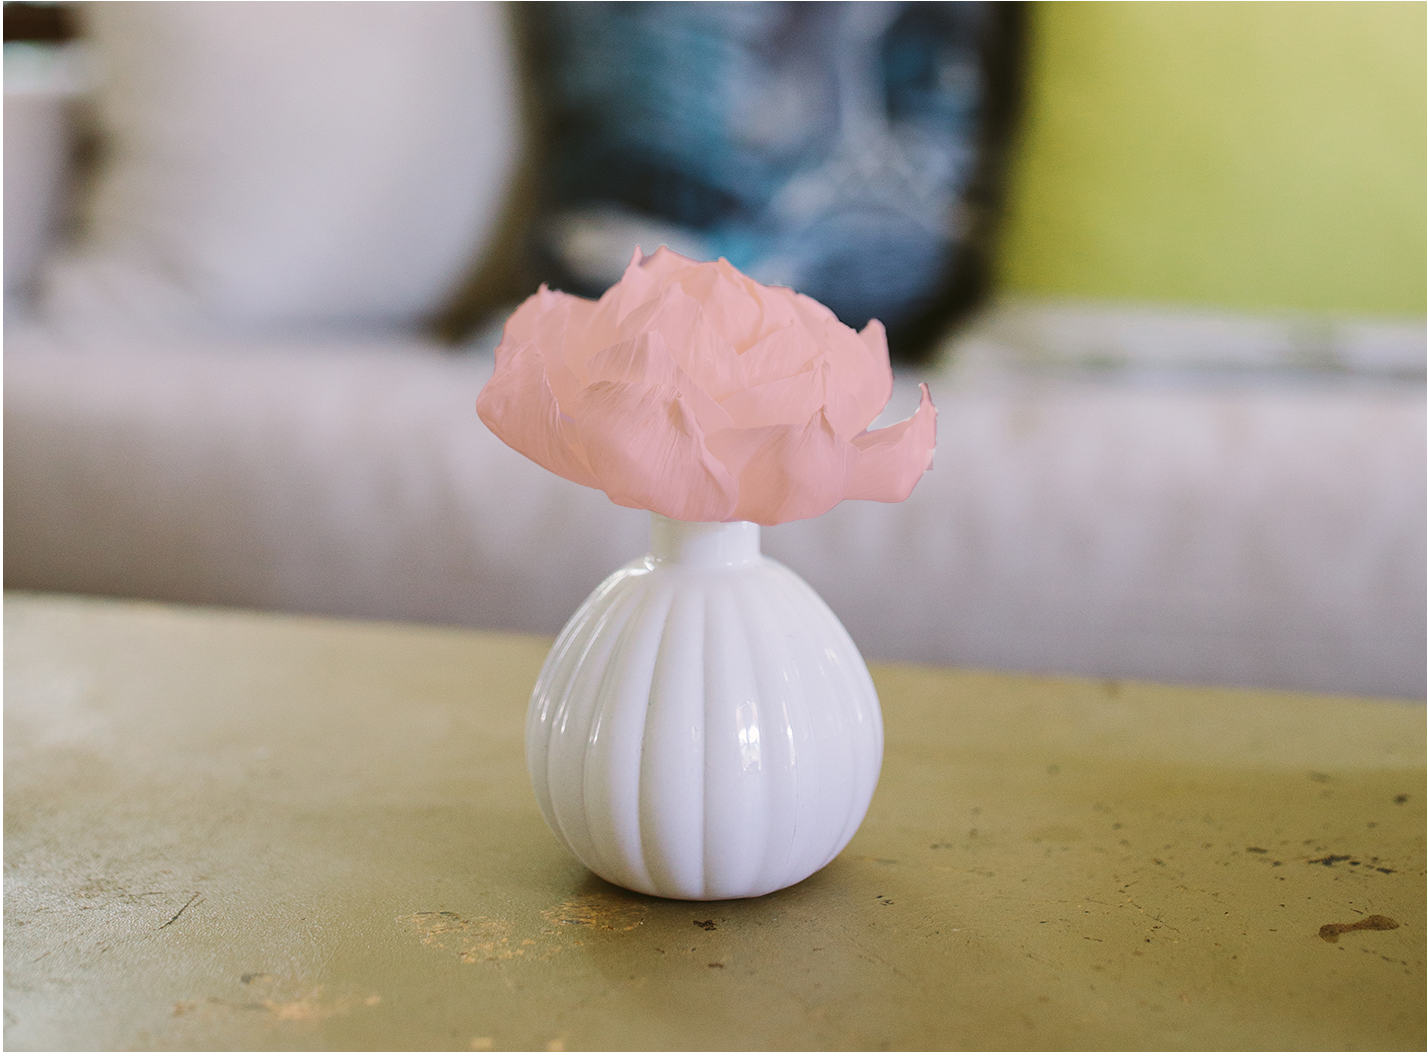 Sweet Grace Flower Diffuser – Adelyne's Boutique & Gifts